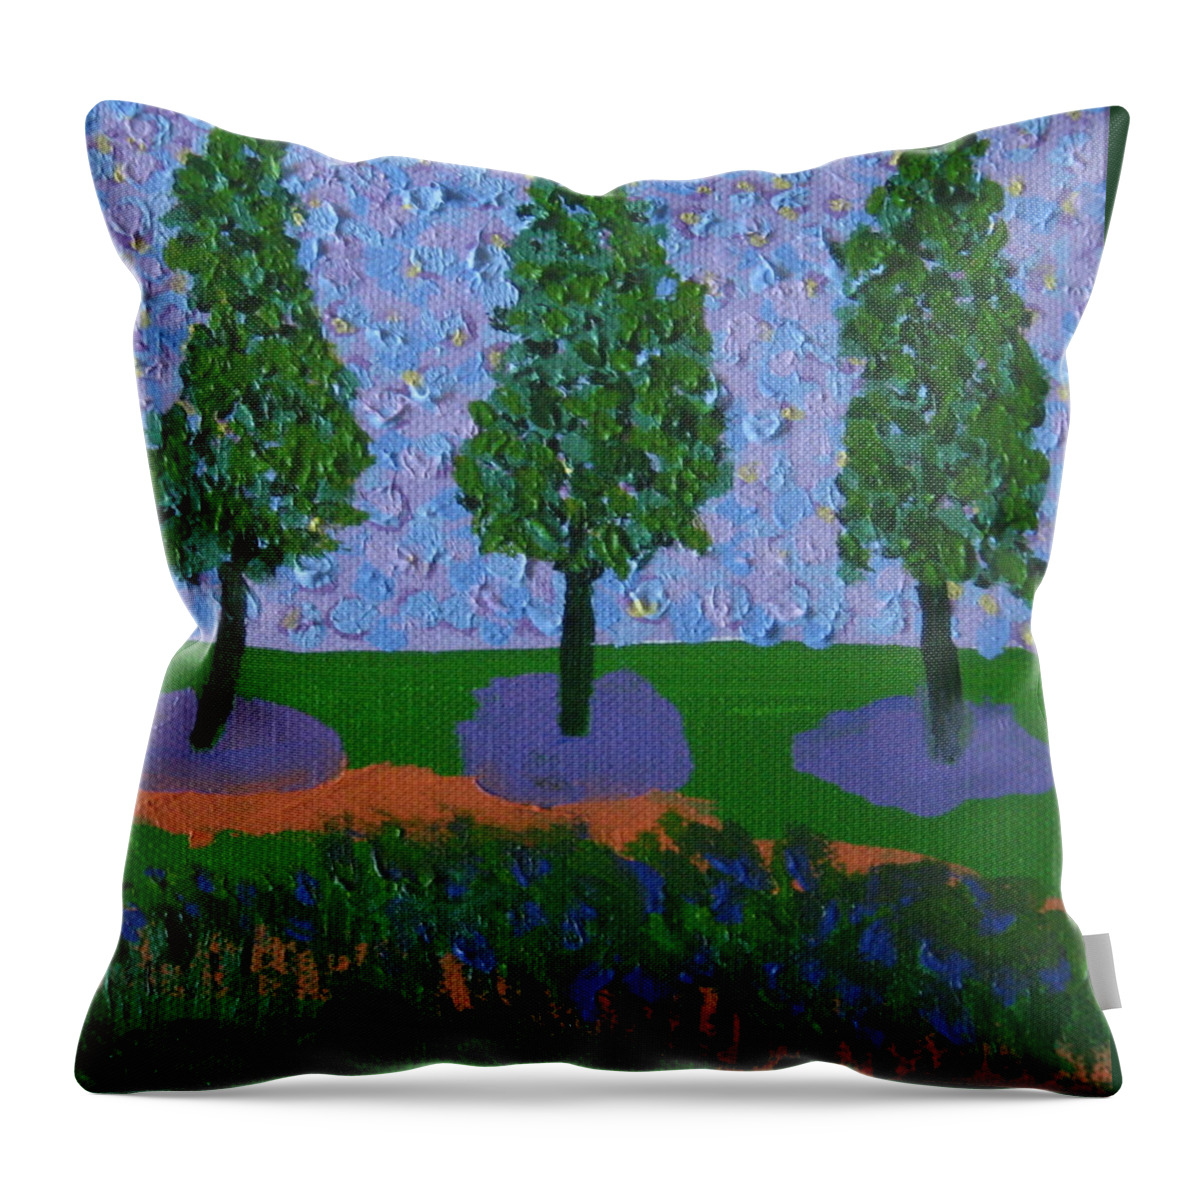 Magical Throw Pillow featuring the painting Those Trees I Always See 10 by Edy Ottesen